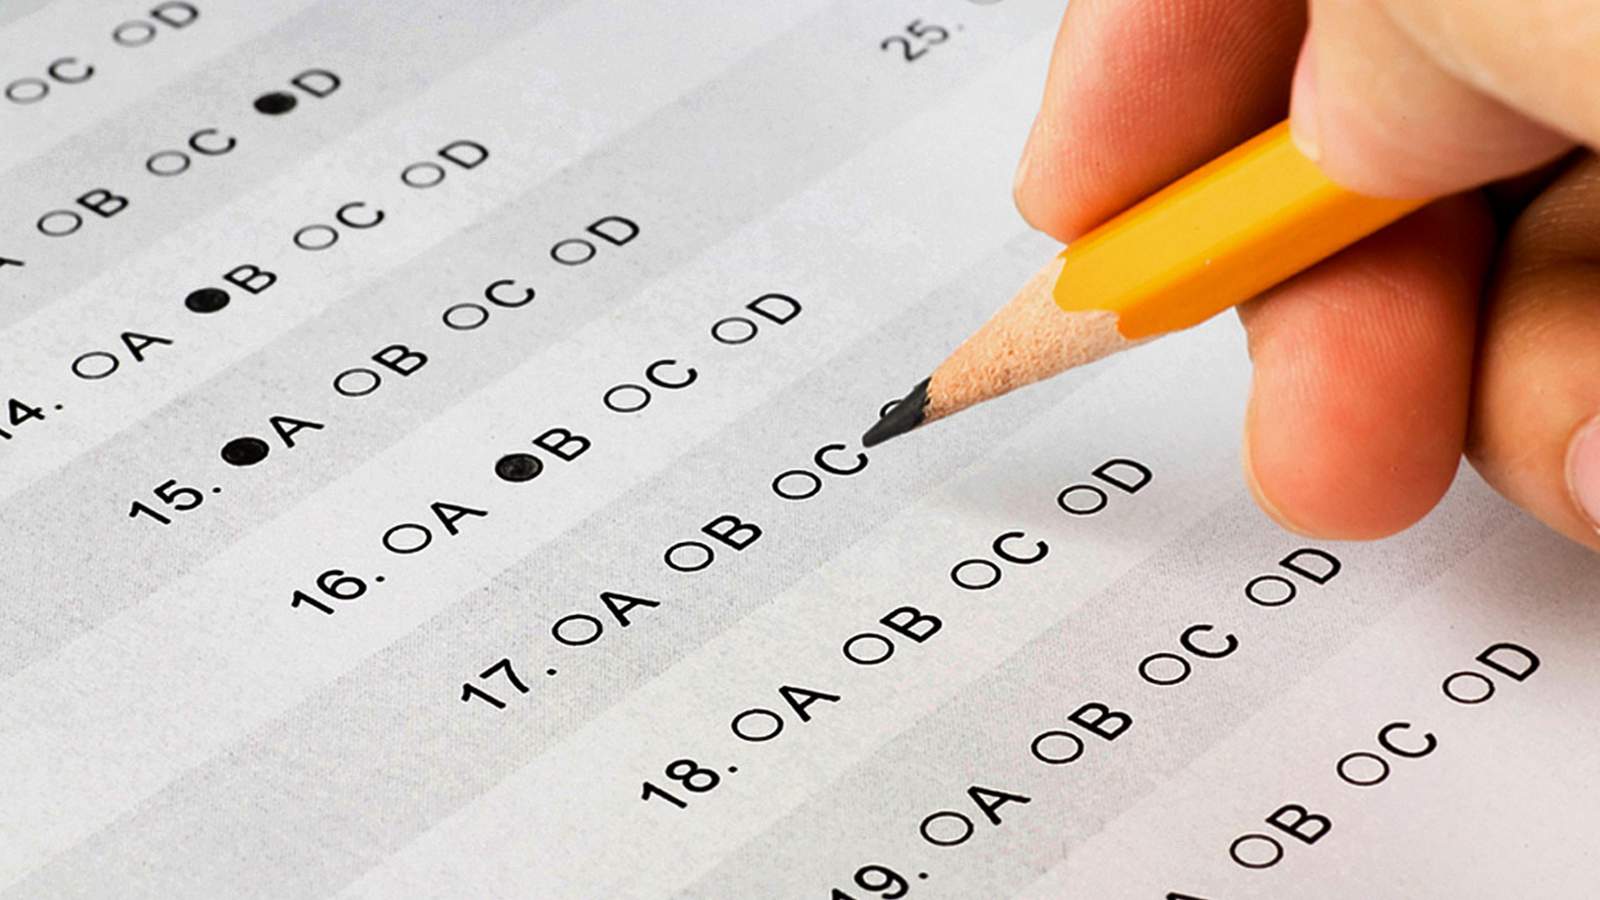 State grants extra time for standardized tests